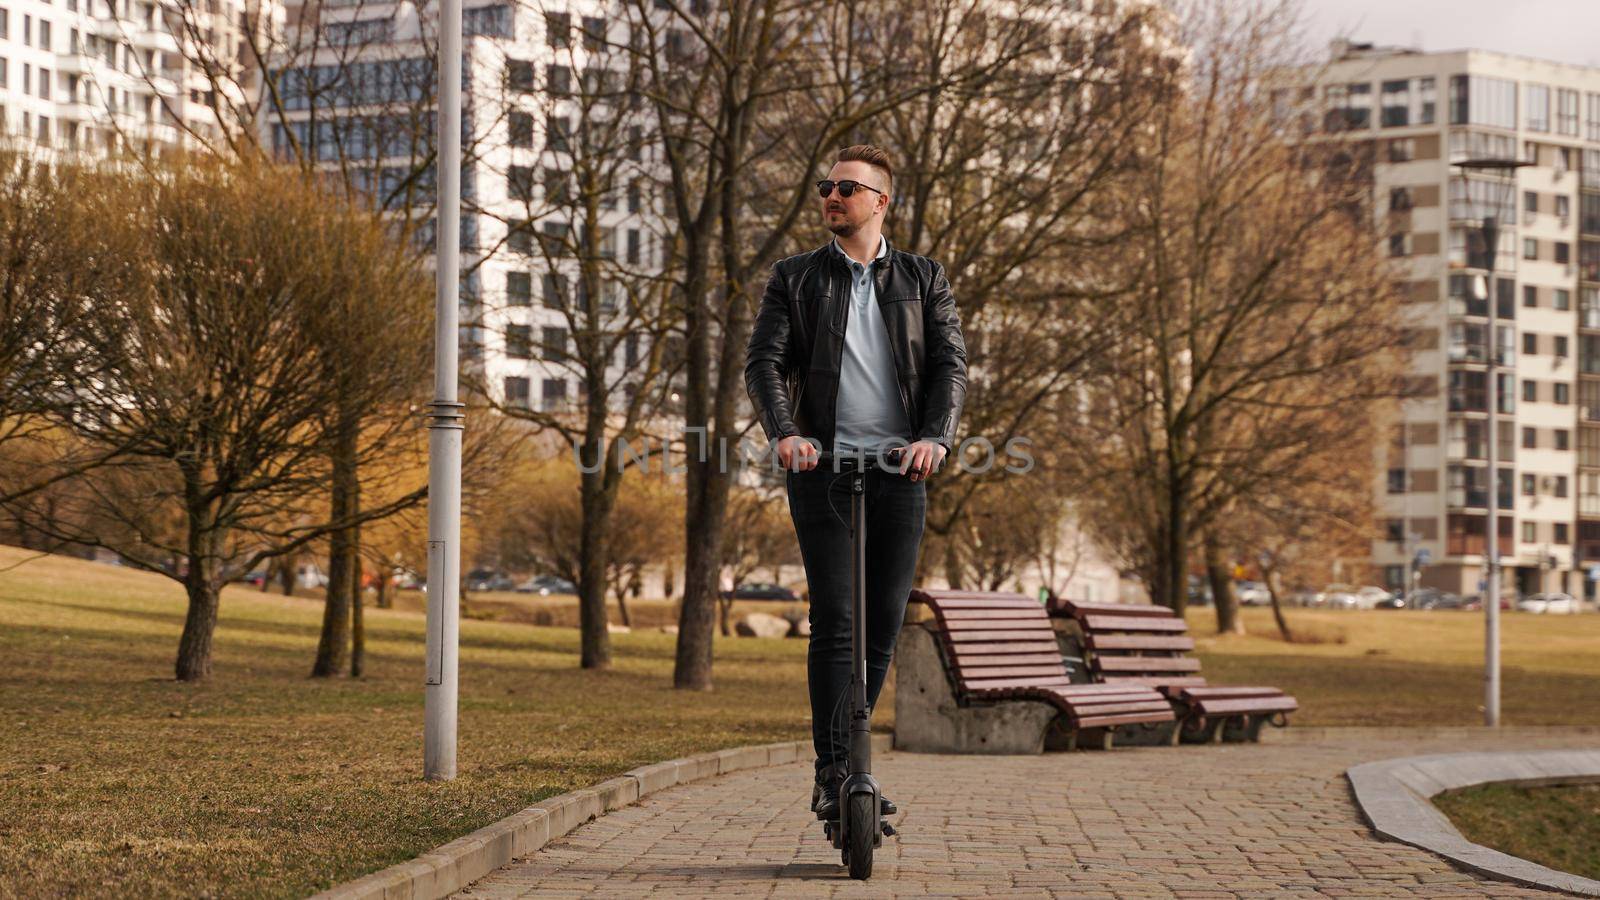 Young man in a black jacket and sunglasses rides an electronic scooter by natali_brill